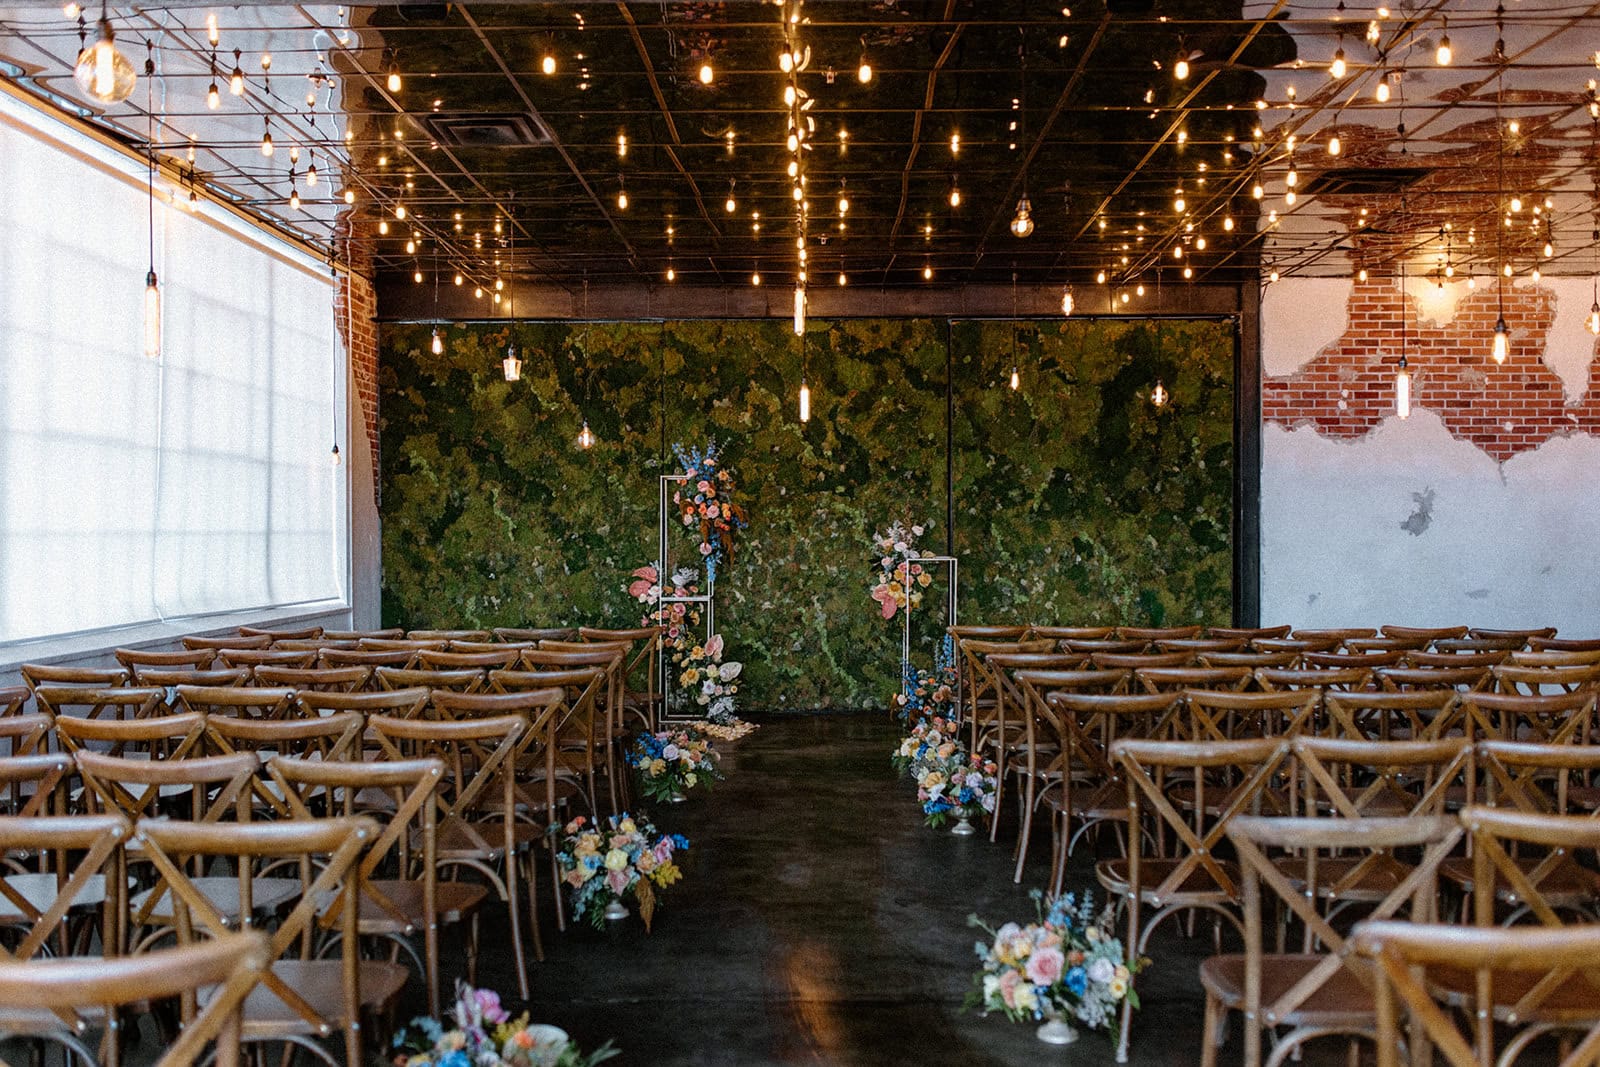 Moss Denver is one of the best Colorado wedding venues. The inside is a blank canvas and the ceremony space is unique for each couple with a moss wall backdrop.